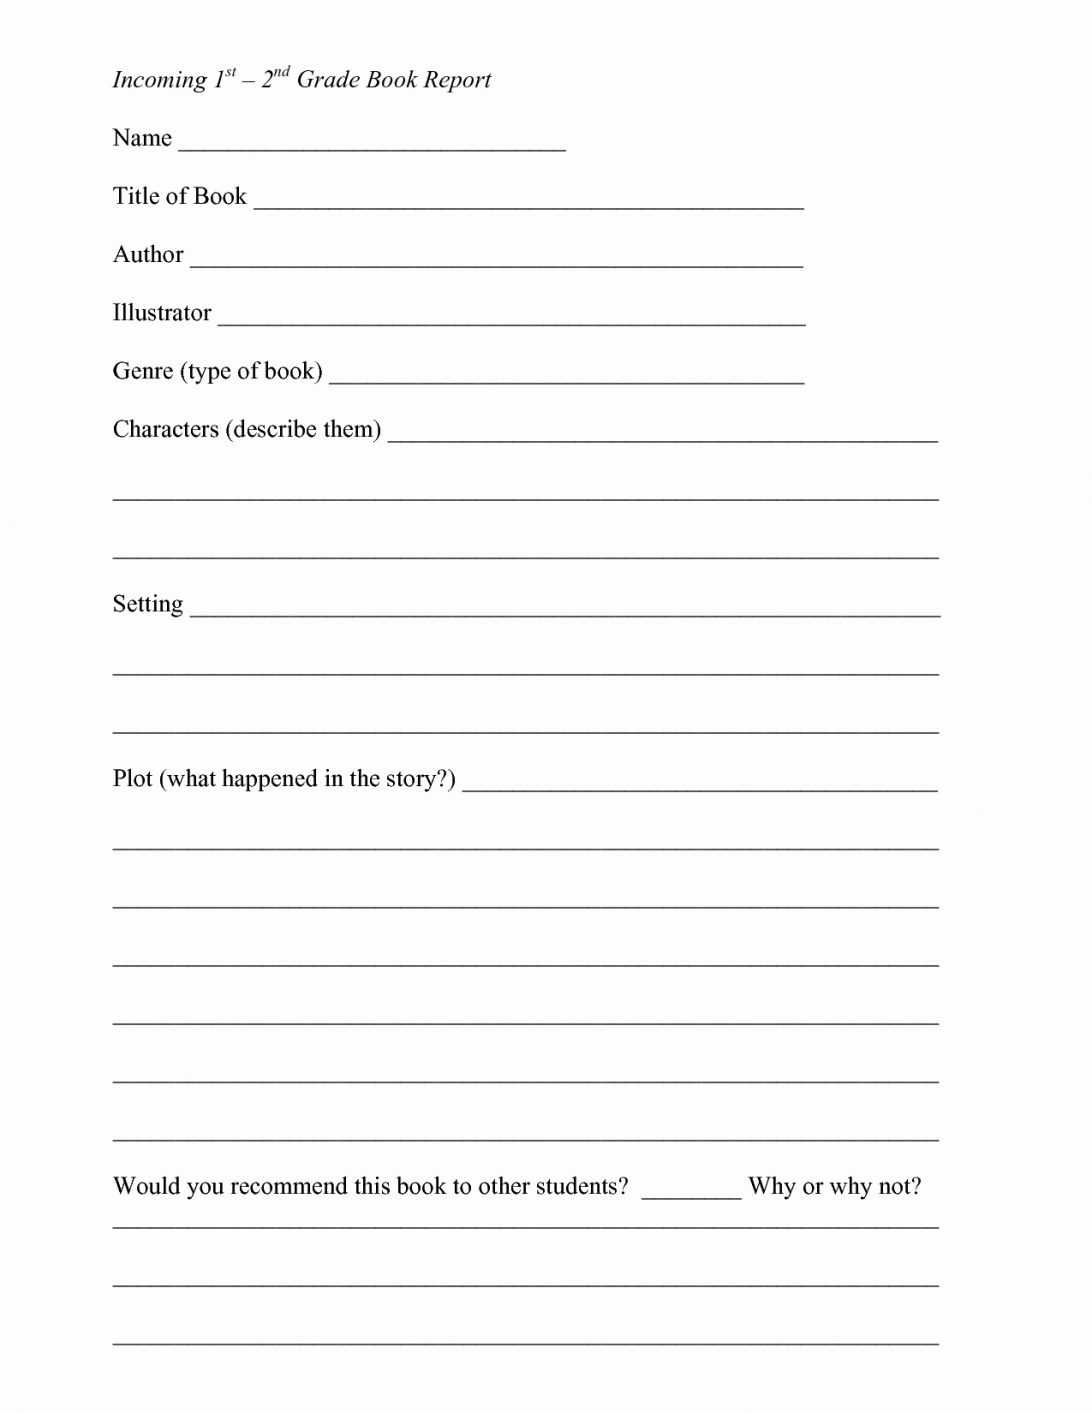 Fiction Book Report Template 6Th Grade For 7Th Graders Pdf In High School Book Report Template